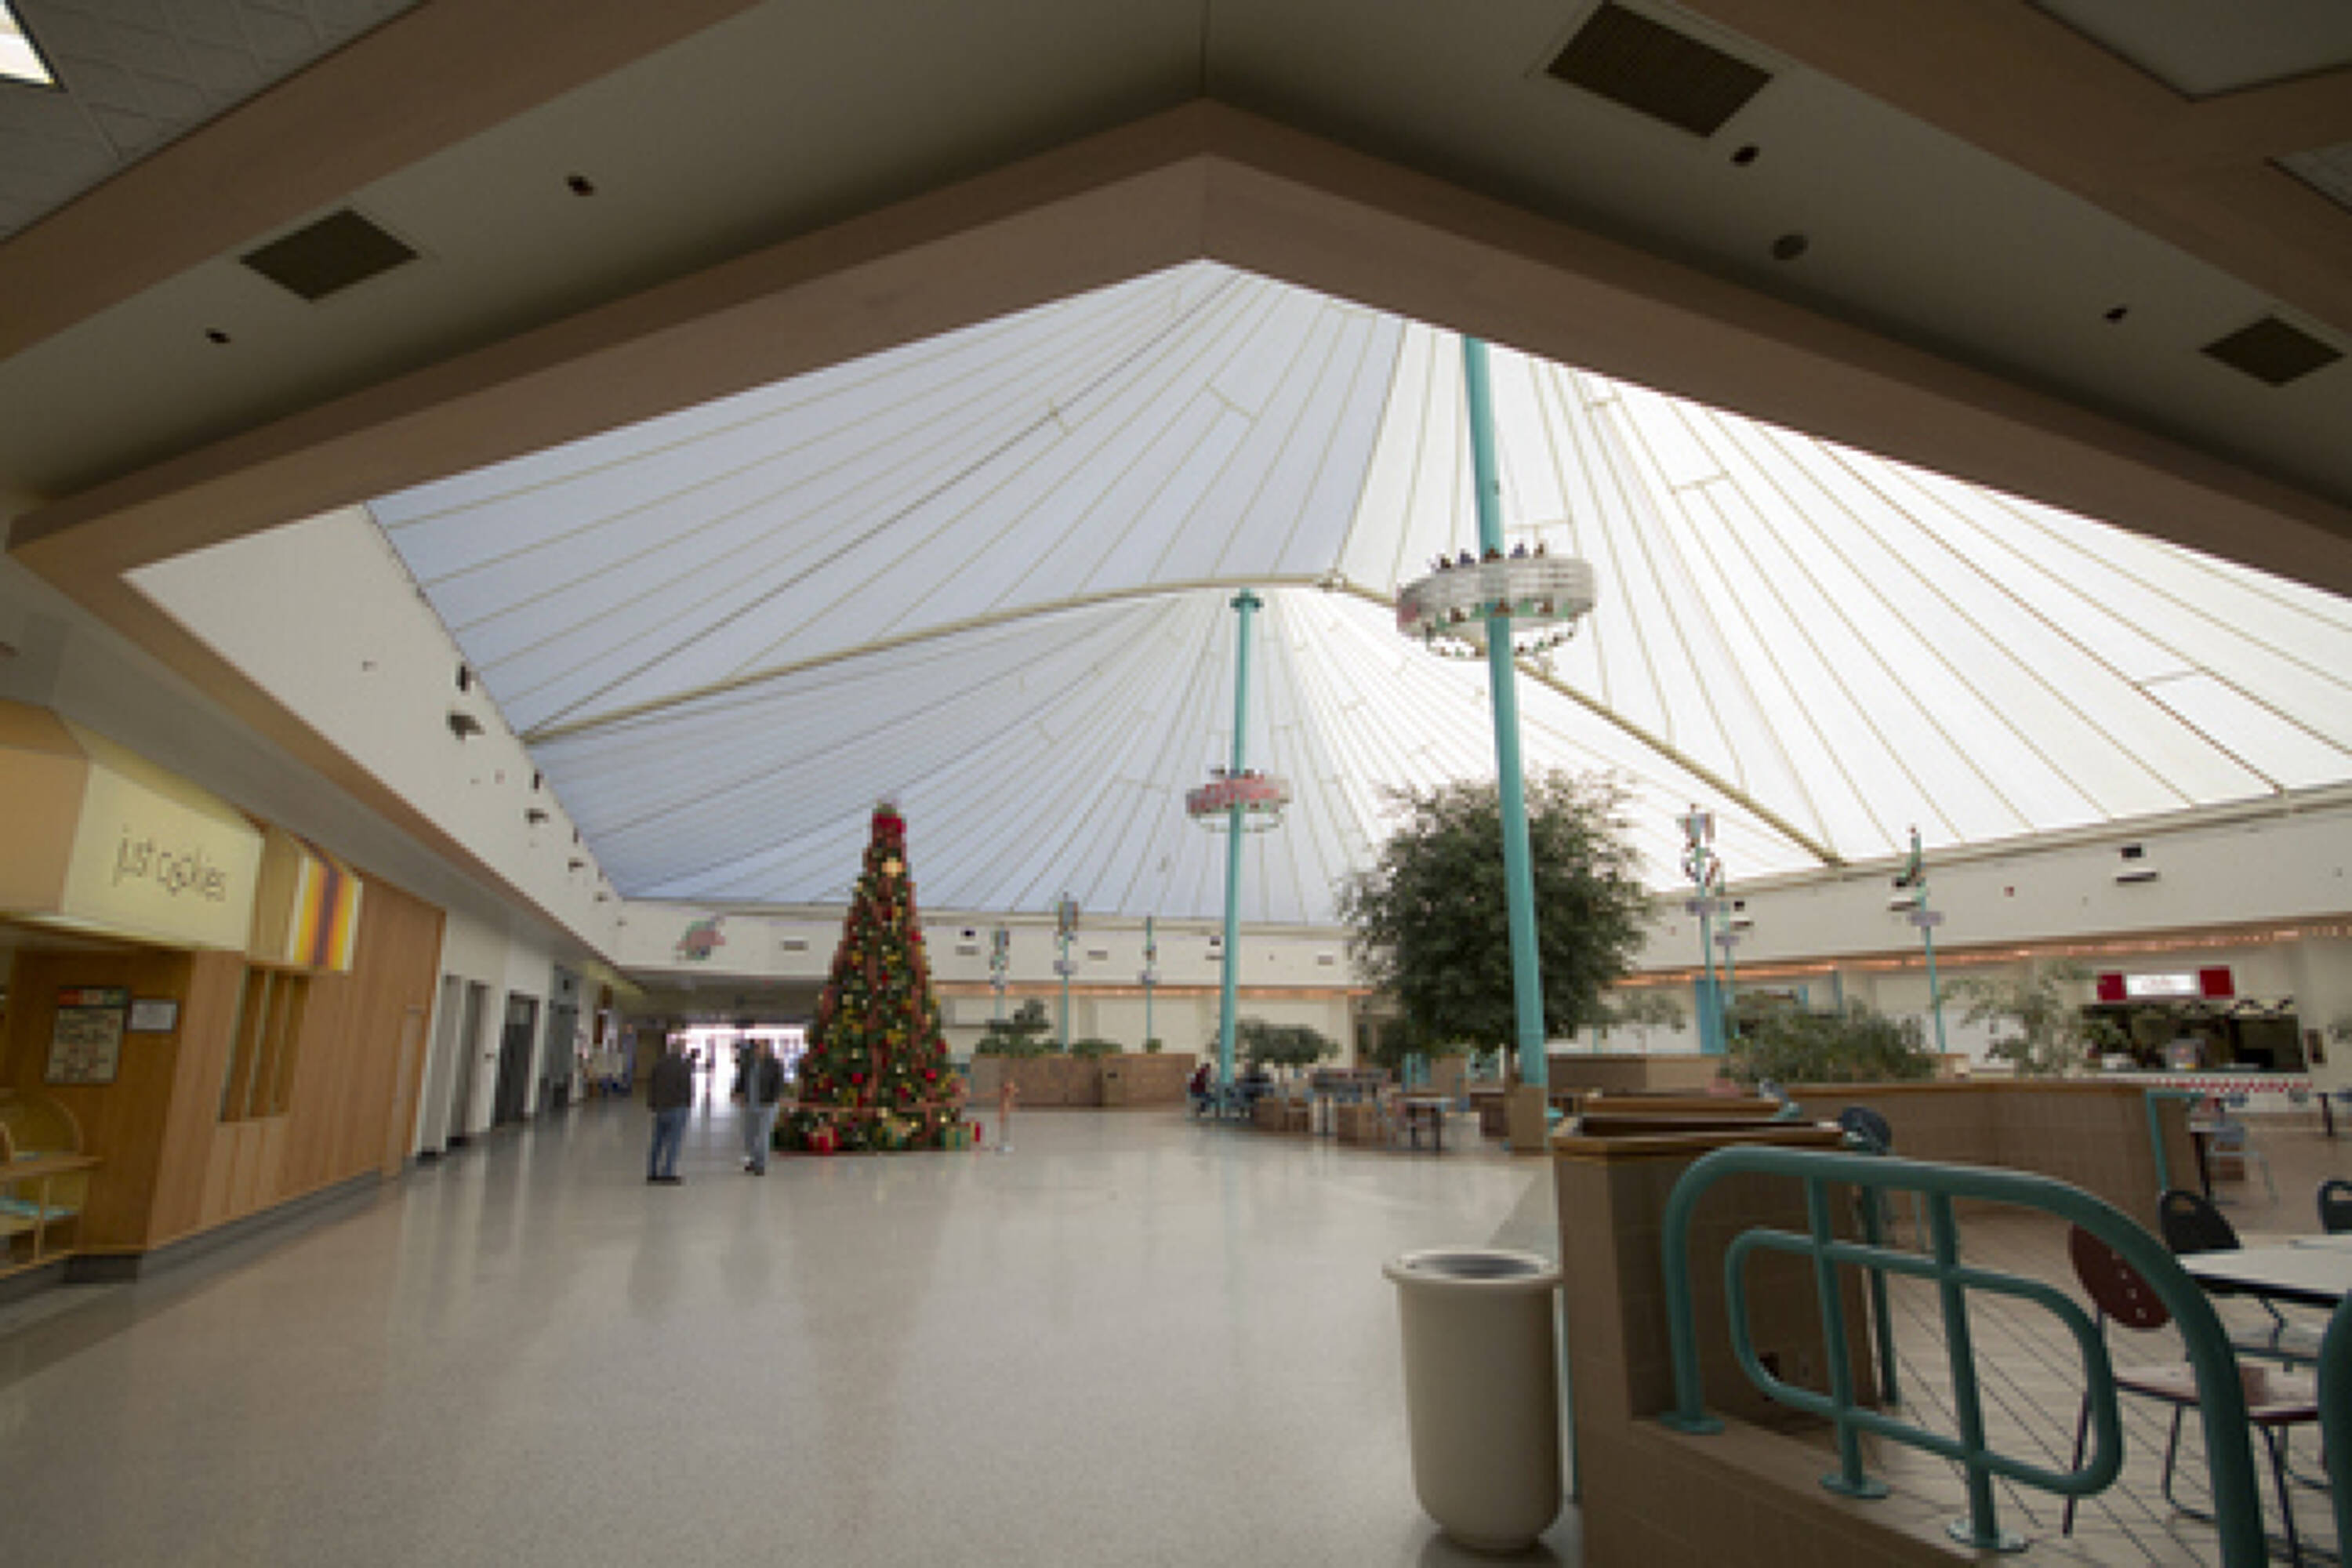 Evansville nonprofits to take up residence in Washington Square Mall